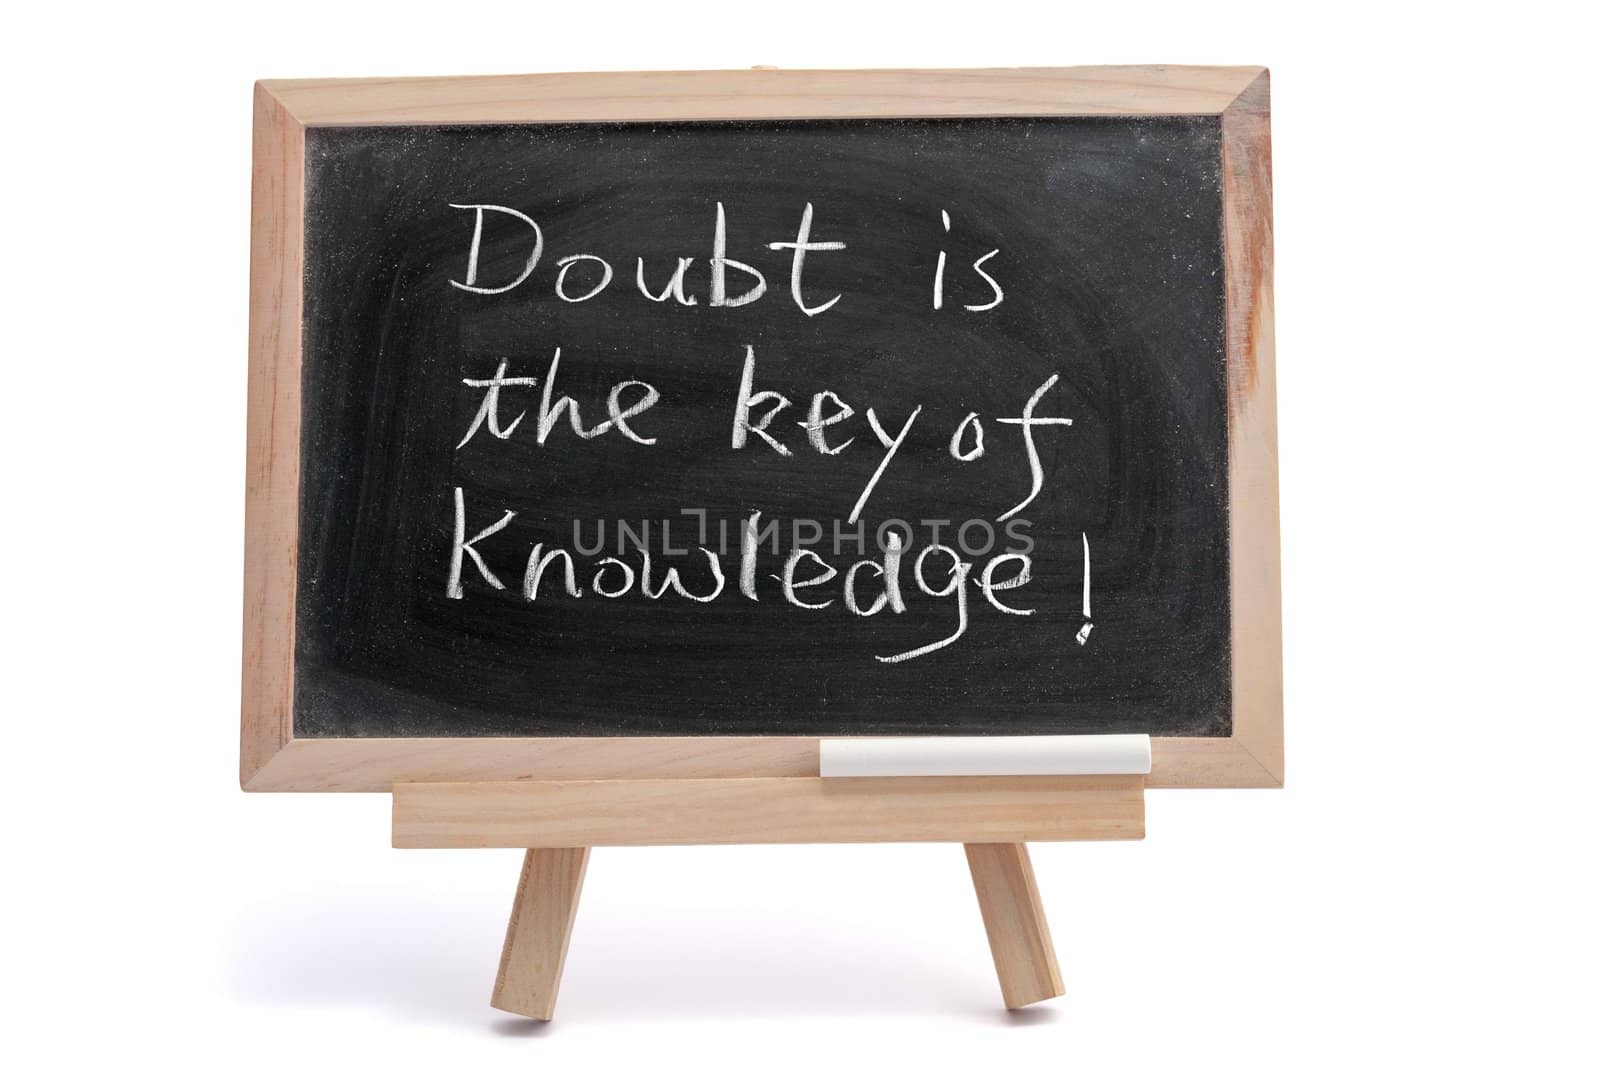 Doubt is the key of knowledge by raywoo